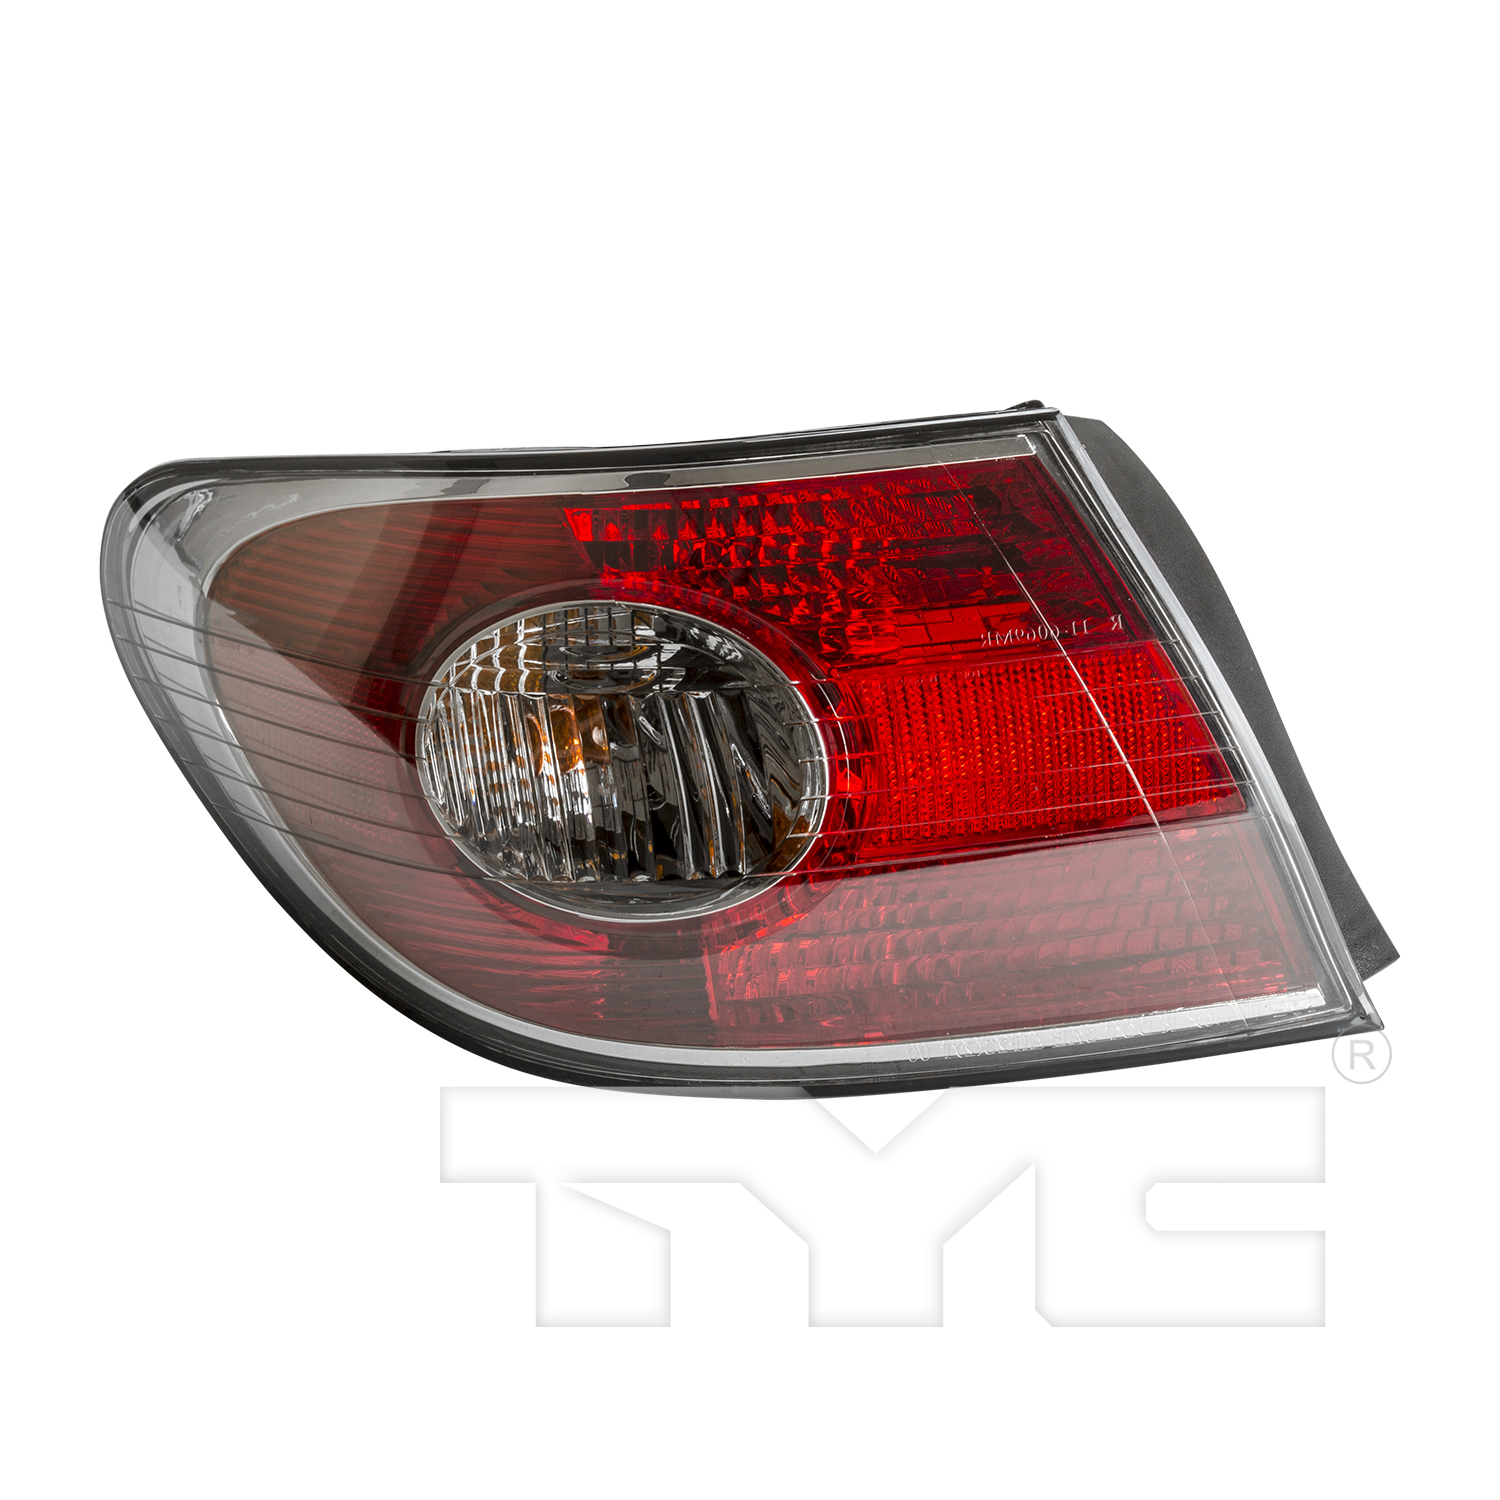 Aftermarket TAILLIGHTS for LEXUS - ES300, ES300,02-03,LT Taillamp assy